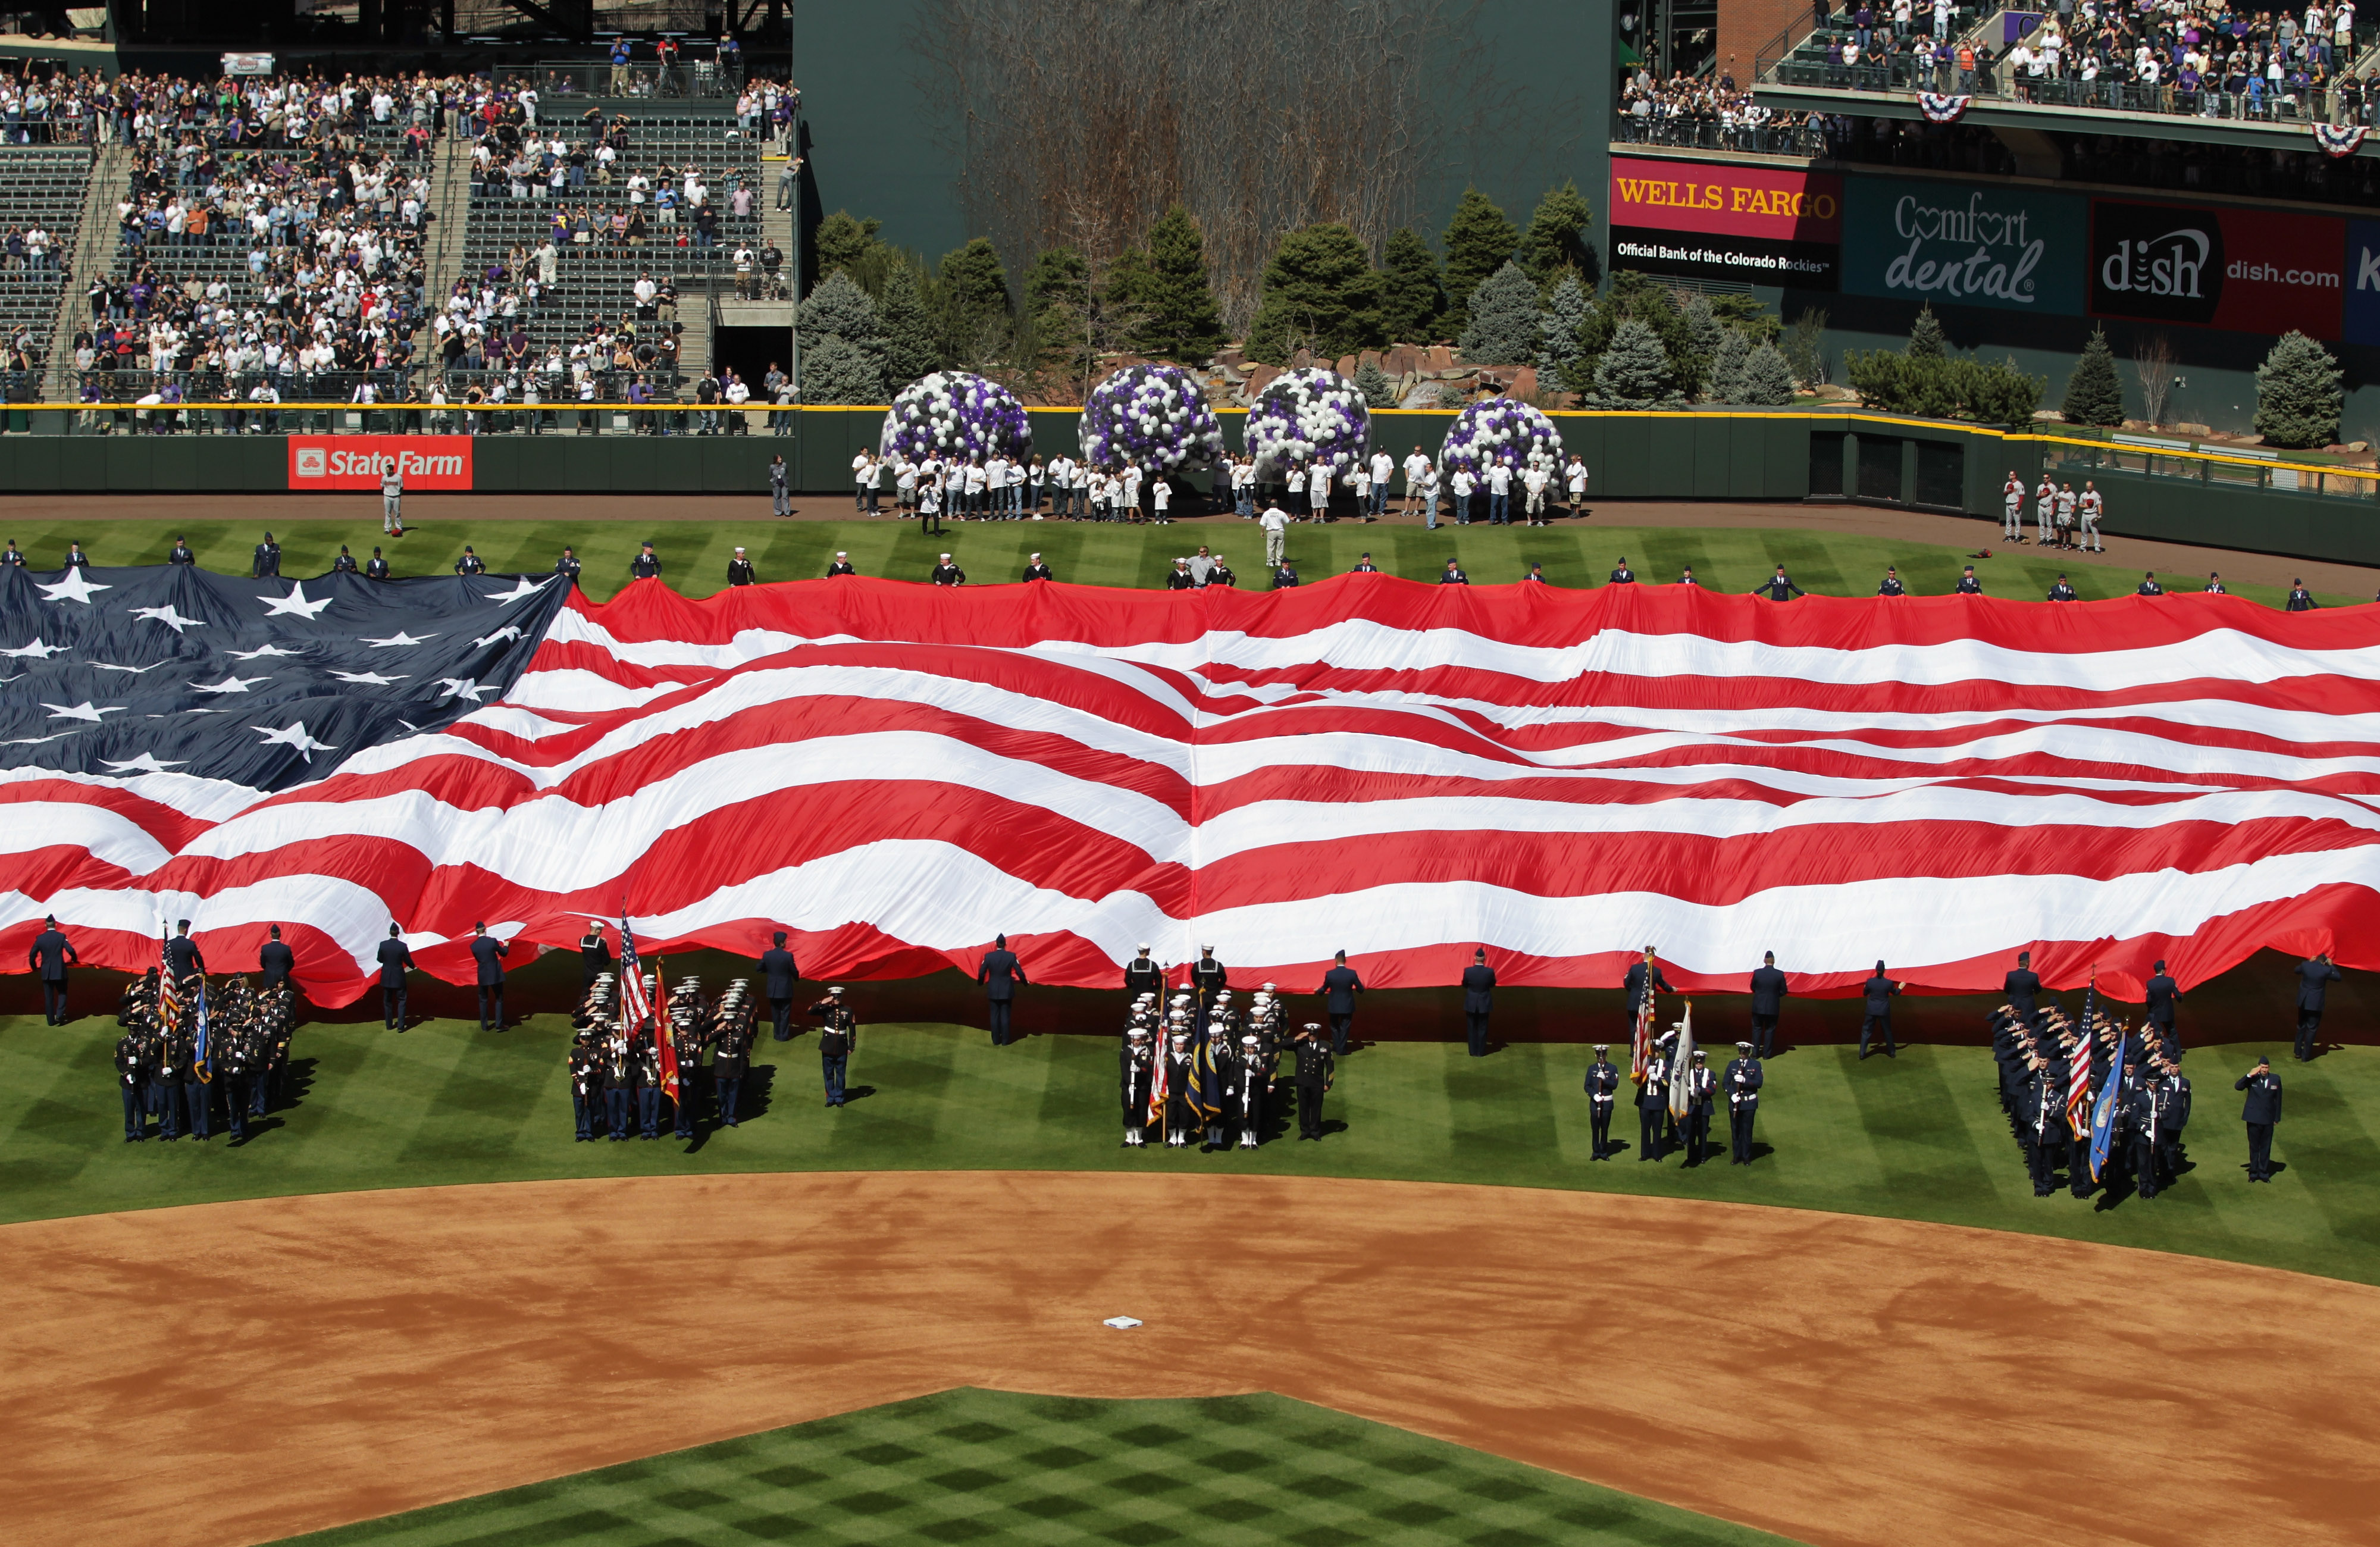 Is big league baseball bad for military vets?